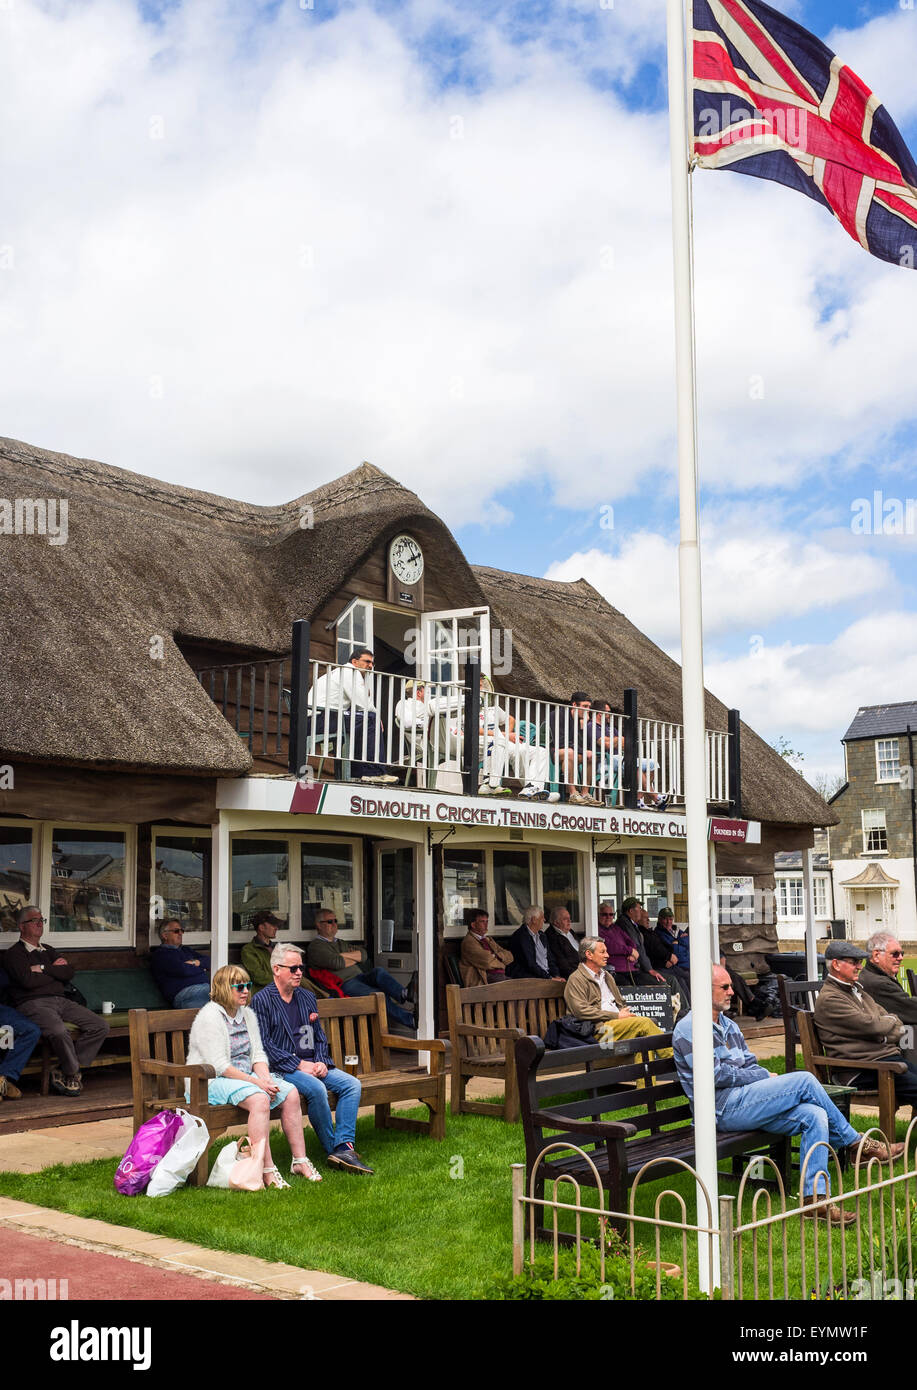 The cricket pavilion with spectators and players watching a match at Sidmouth Cricket Club in Devon. Stock Photo